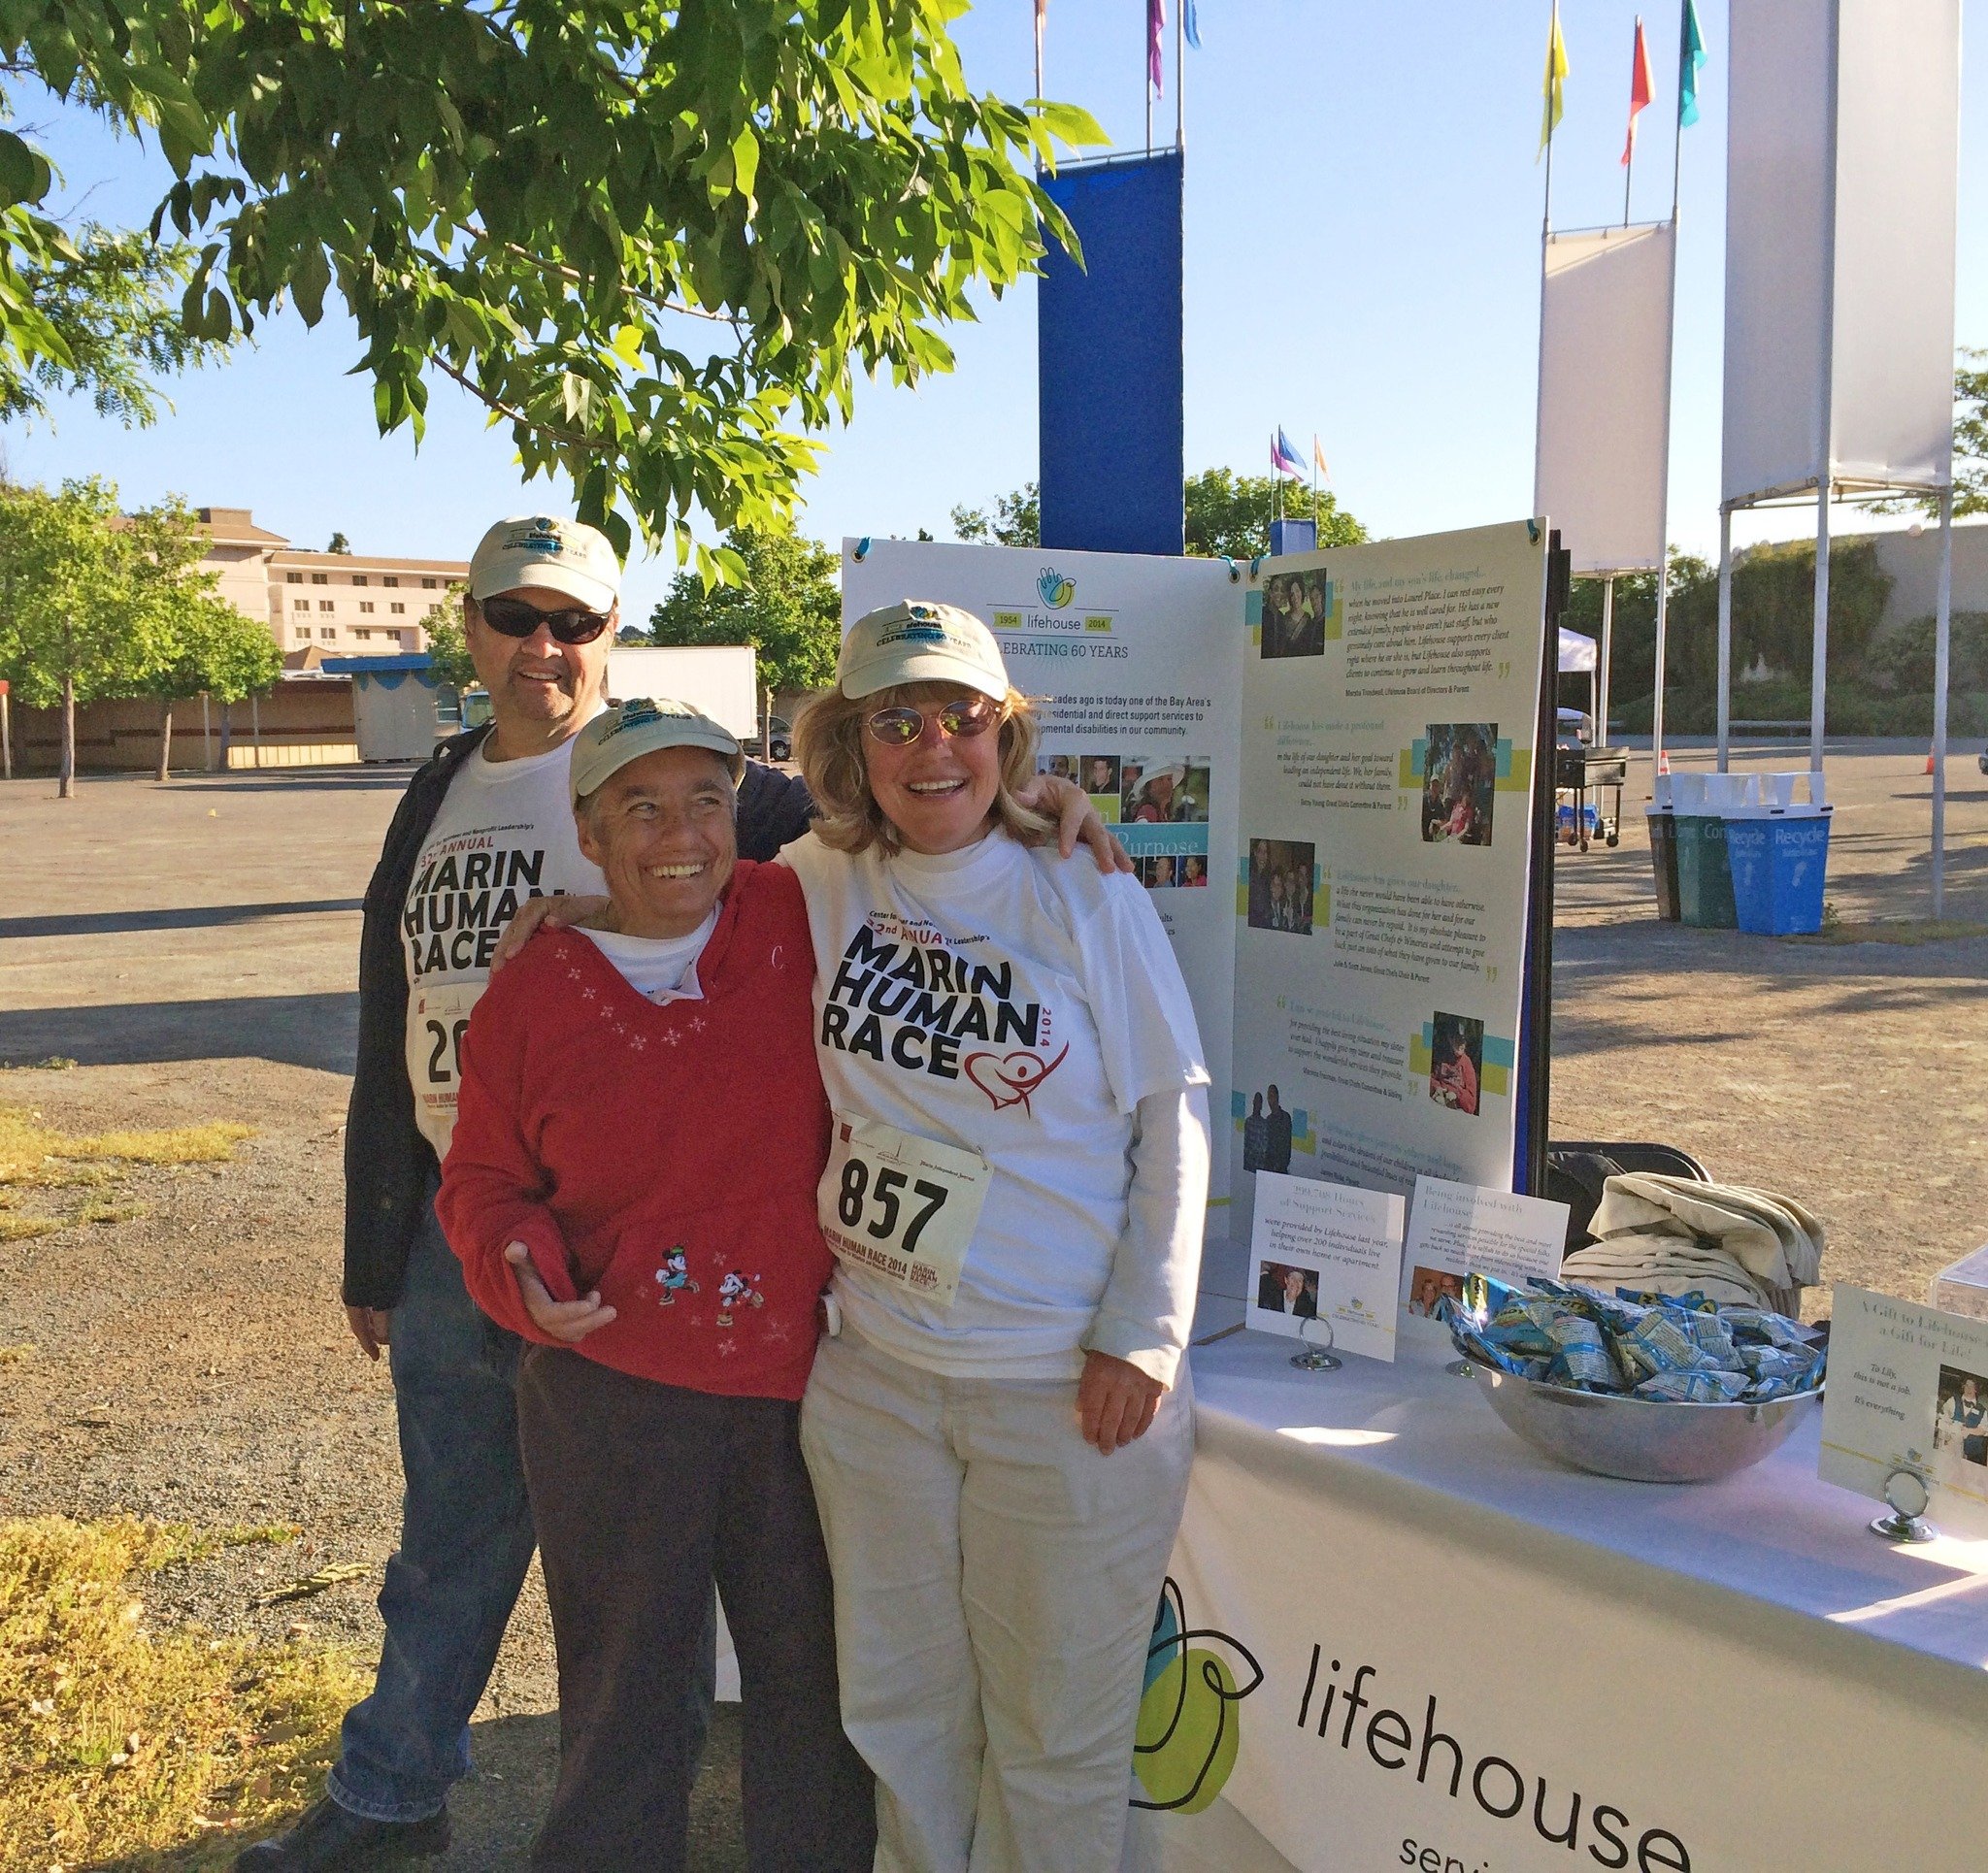 The Human Race starts at 8am tomorrow at the Old Courthouse Square in Santa Rosa! We need your help to ensure that Lifehouse is able to continue providing high quality services that provide opportunity for a full life. This is a dynamic 5K walk, roll